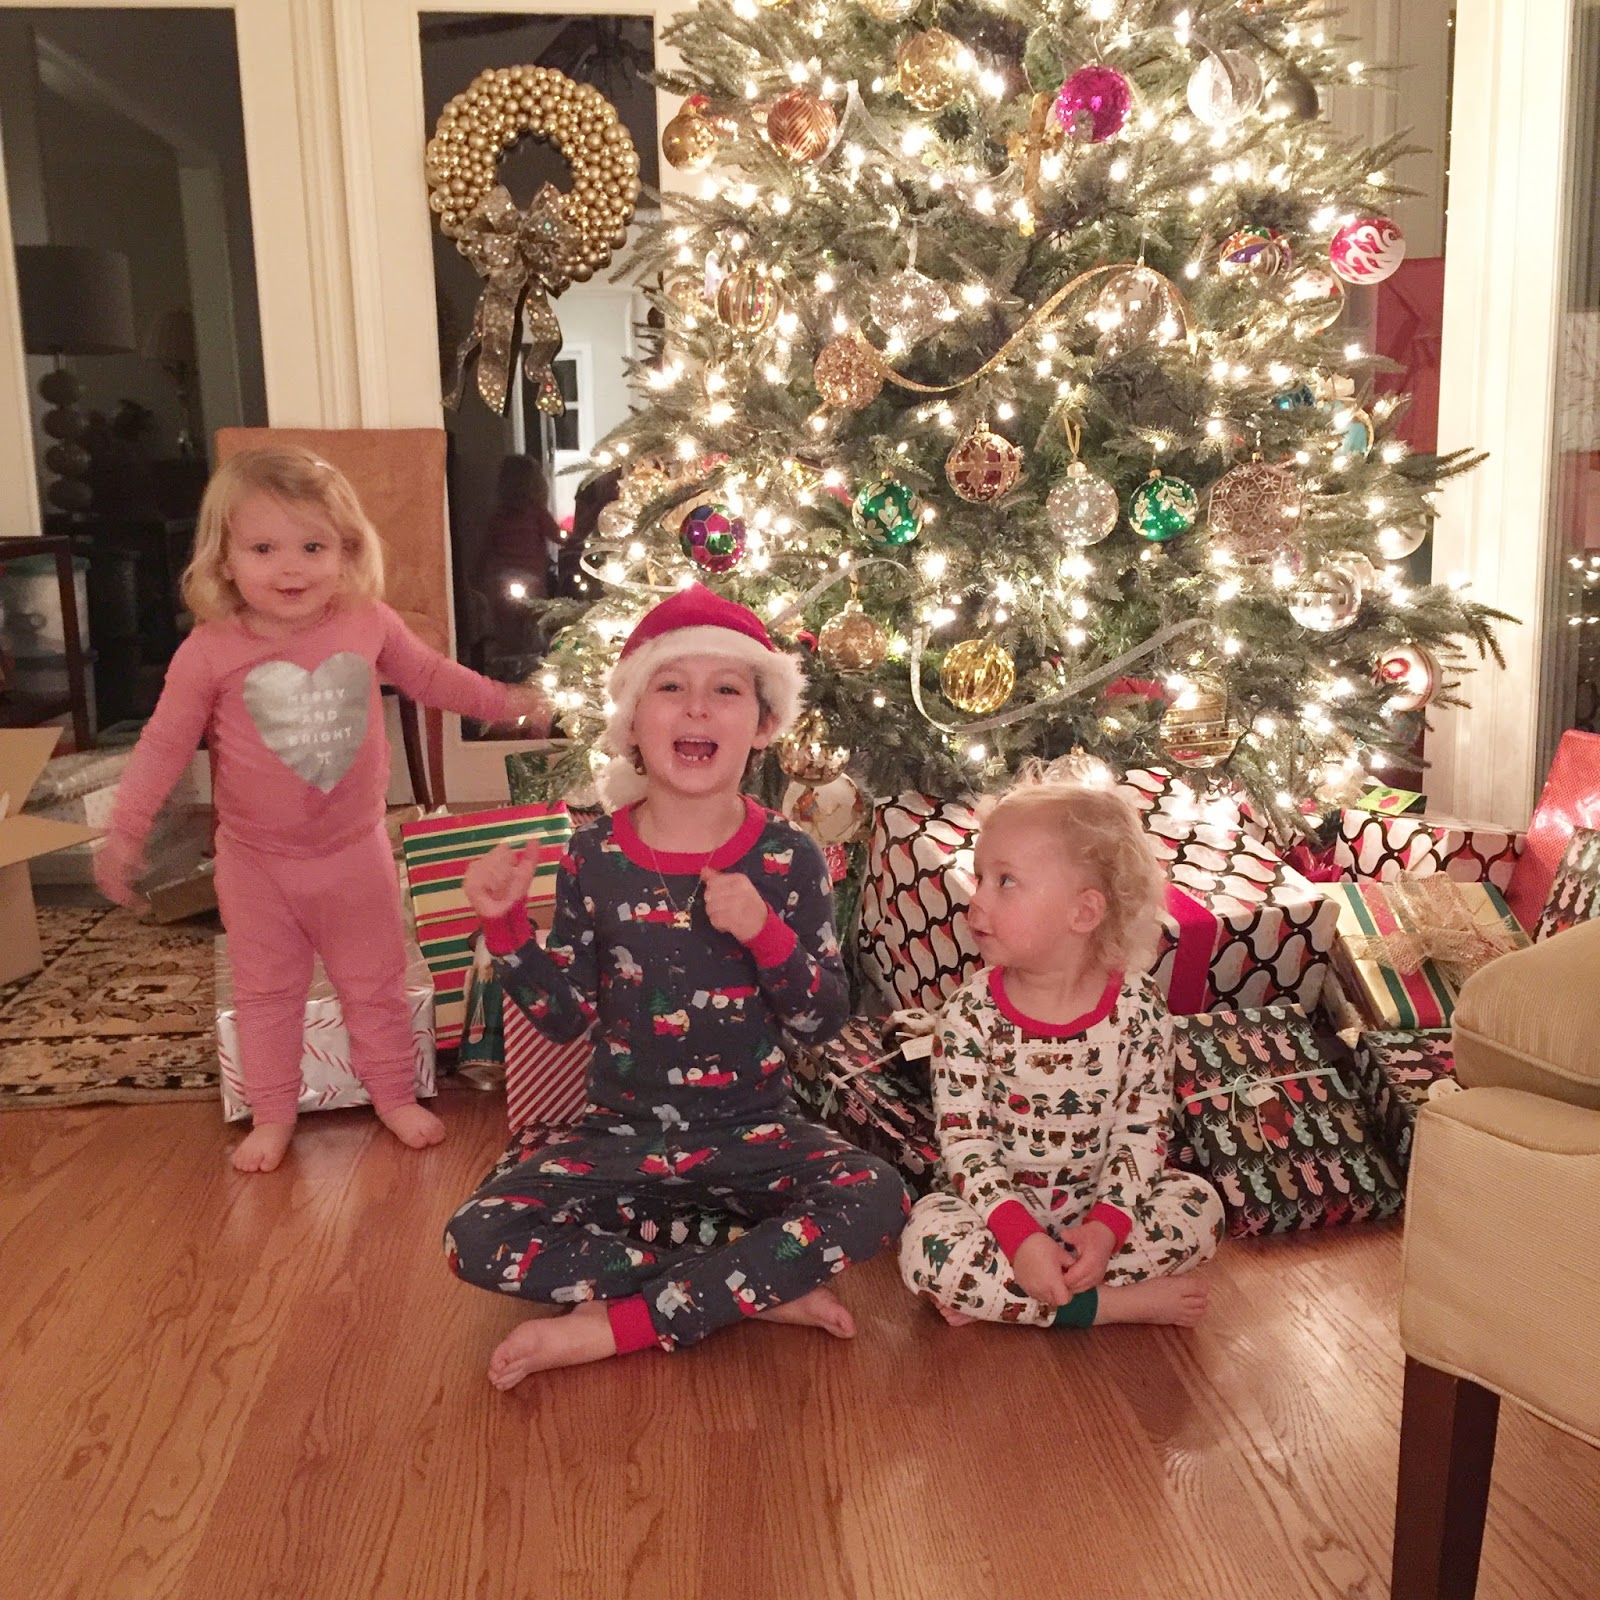 designer bags and dirty diapers: Merry Christmas!!